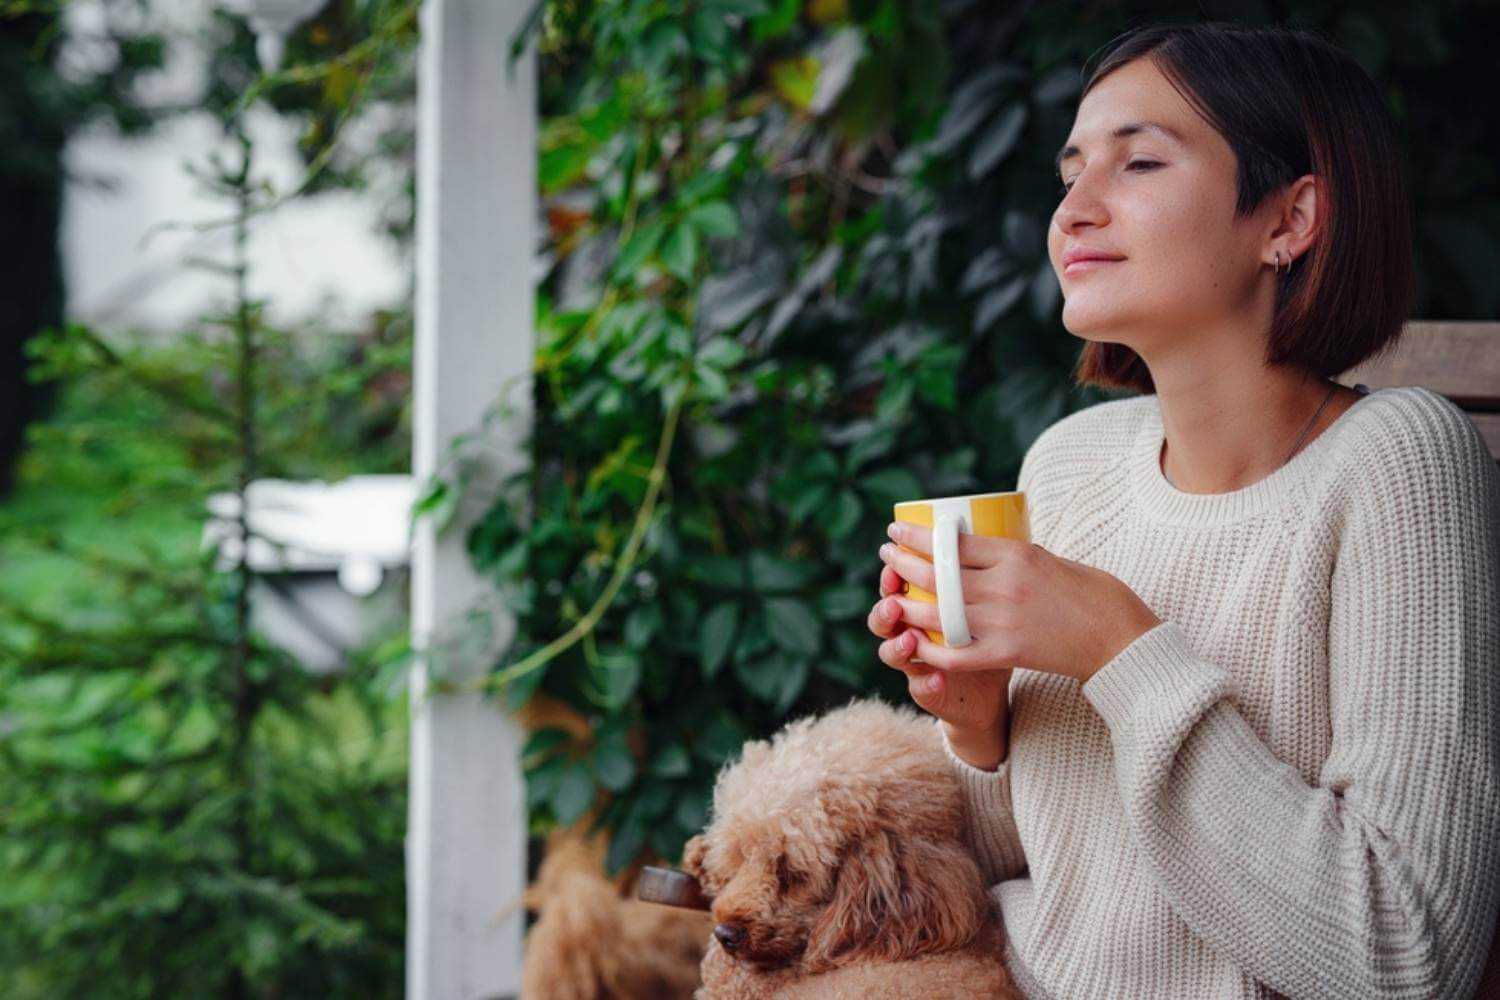 Boise ID Woman Drinking Coffee With Dog